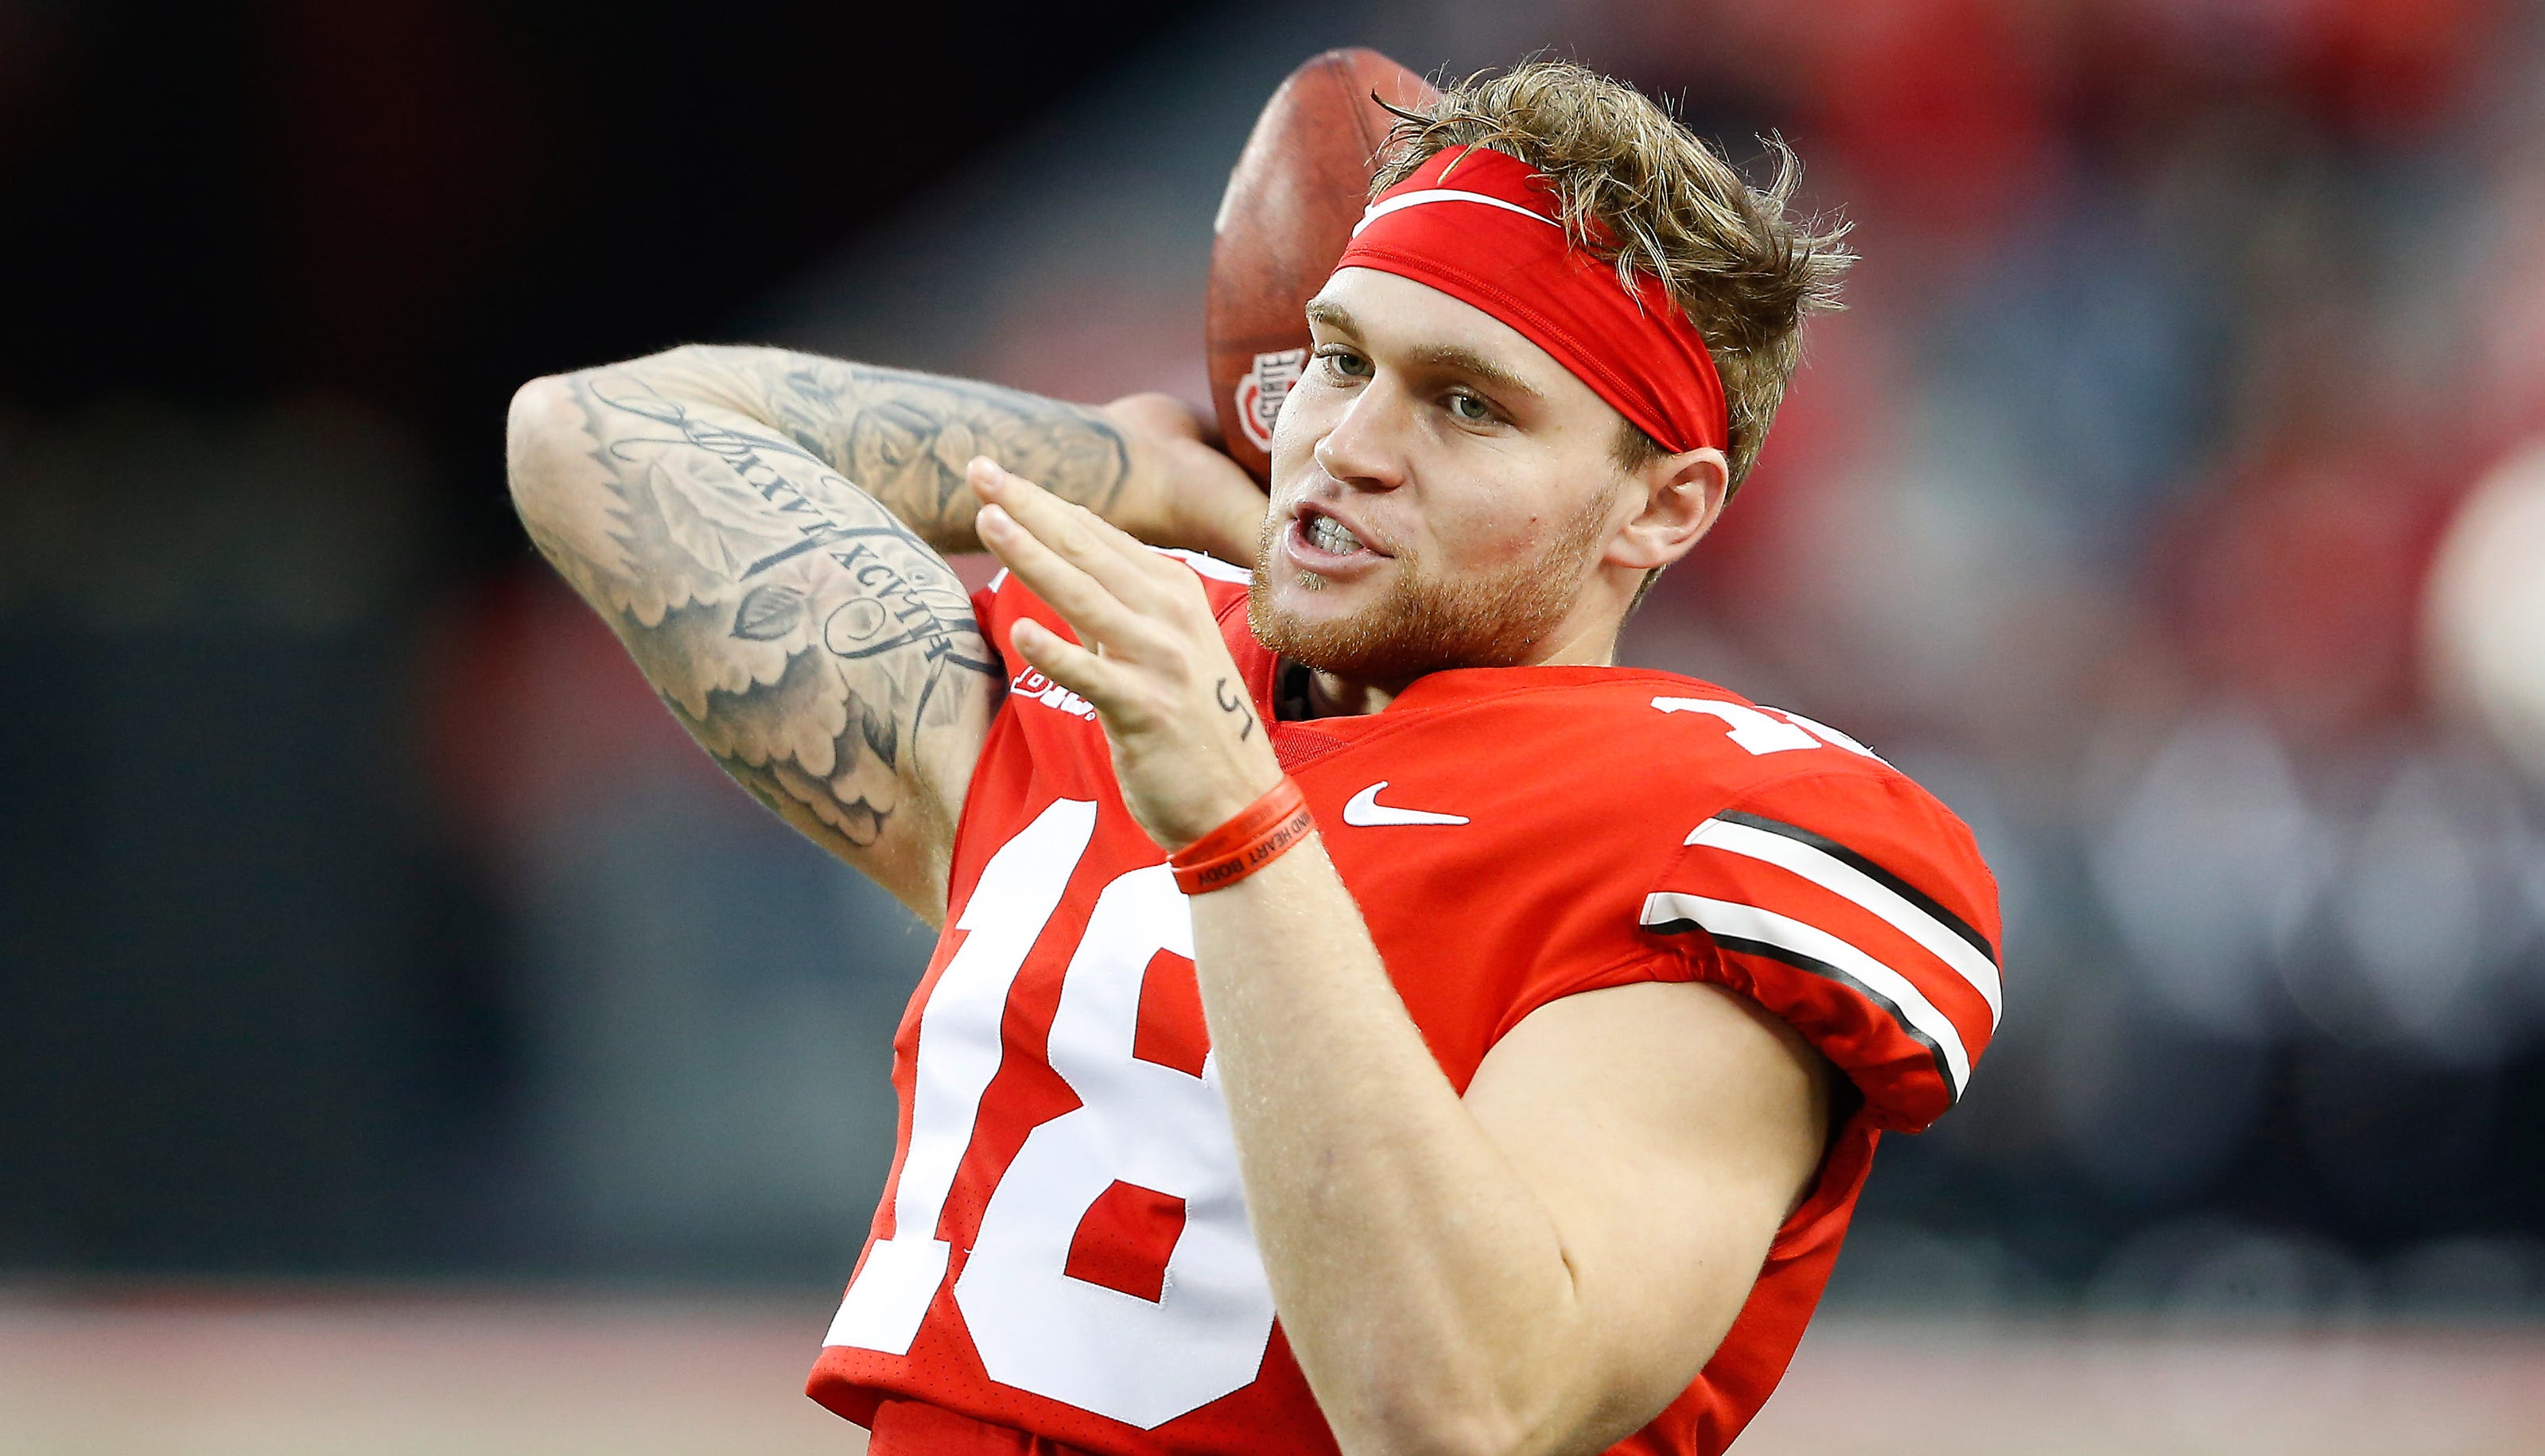 Former Ohio State QB Tate Martell says he's transferring to Miami.